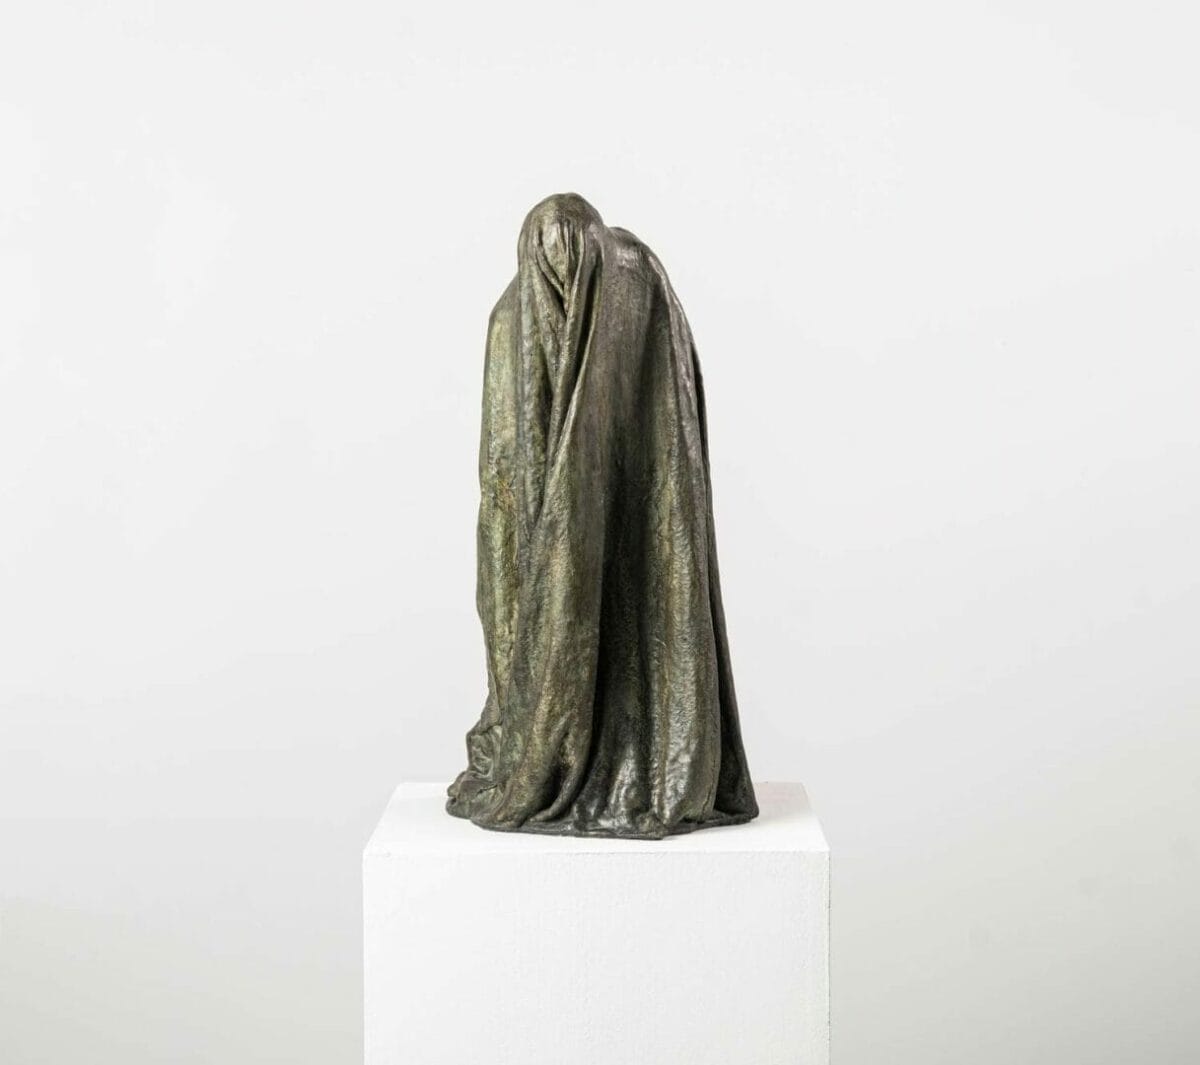 A bronze sculpture by Guy Le Perse titled "Veiled Shadow I". Inspired by Dante's "Divine Comedy", this work depicts a hypocrite condemned in the eighth circle of Hell.